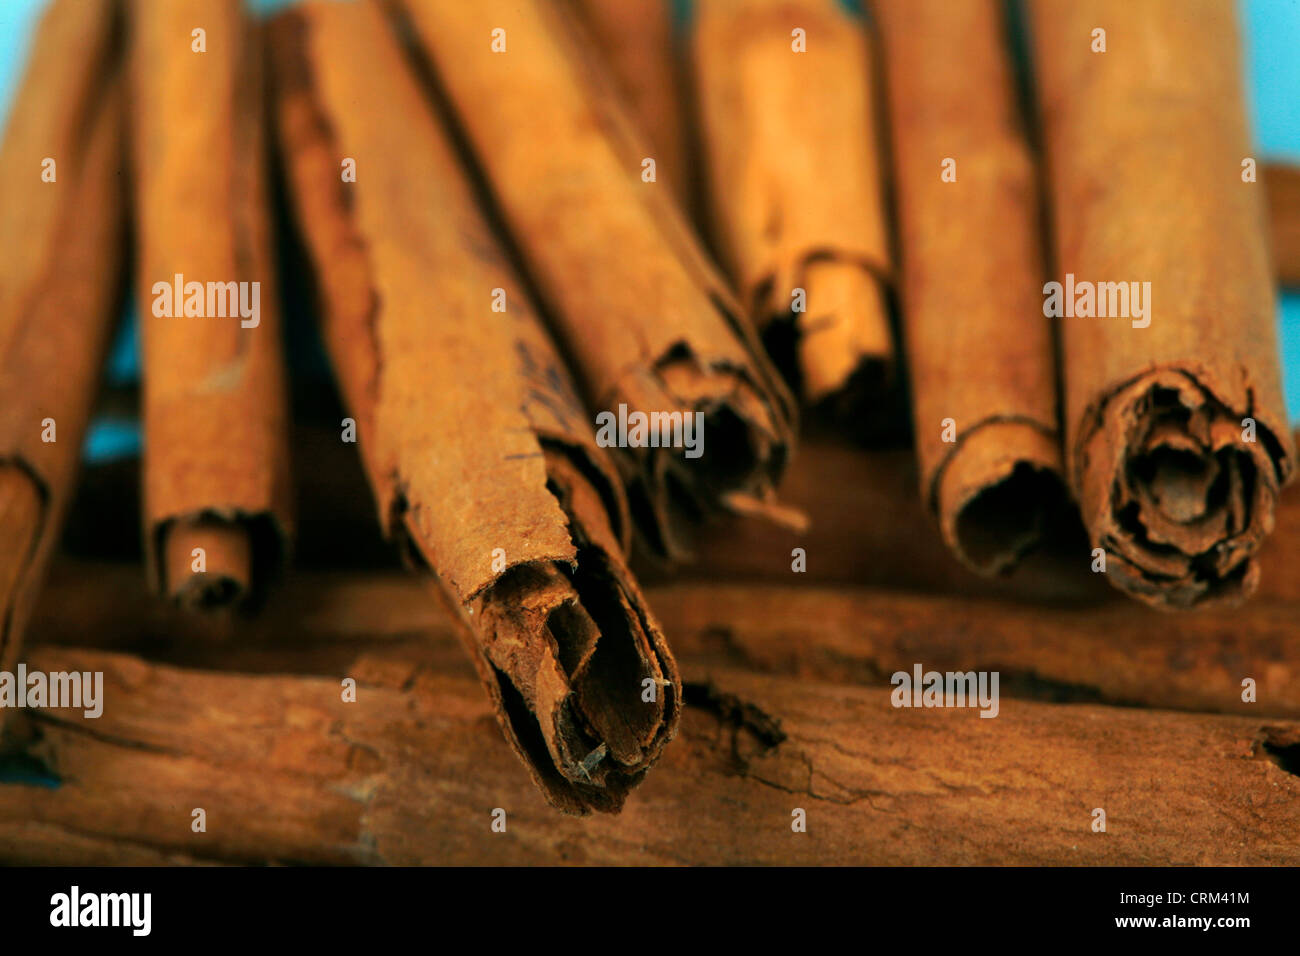 Cinnamon sticks as a herbal medicine have been traditionally been used to treat toothache and fight bad breath, to stave off the common cold, and aid digestion Stock Photo